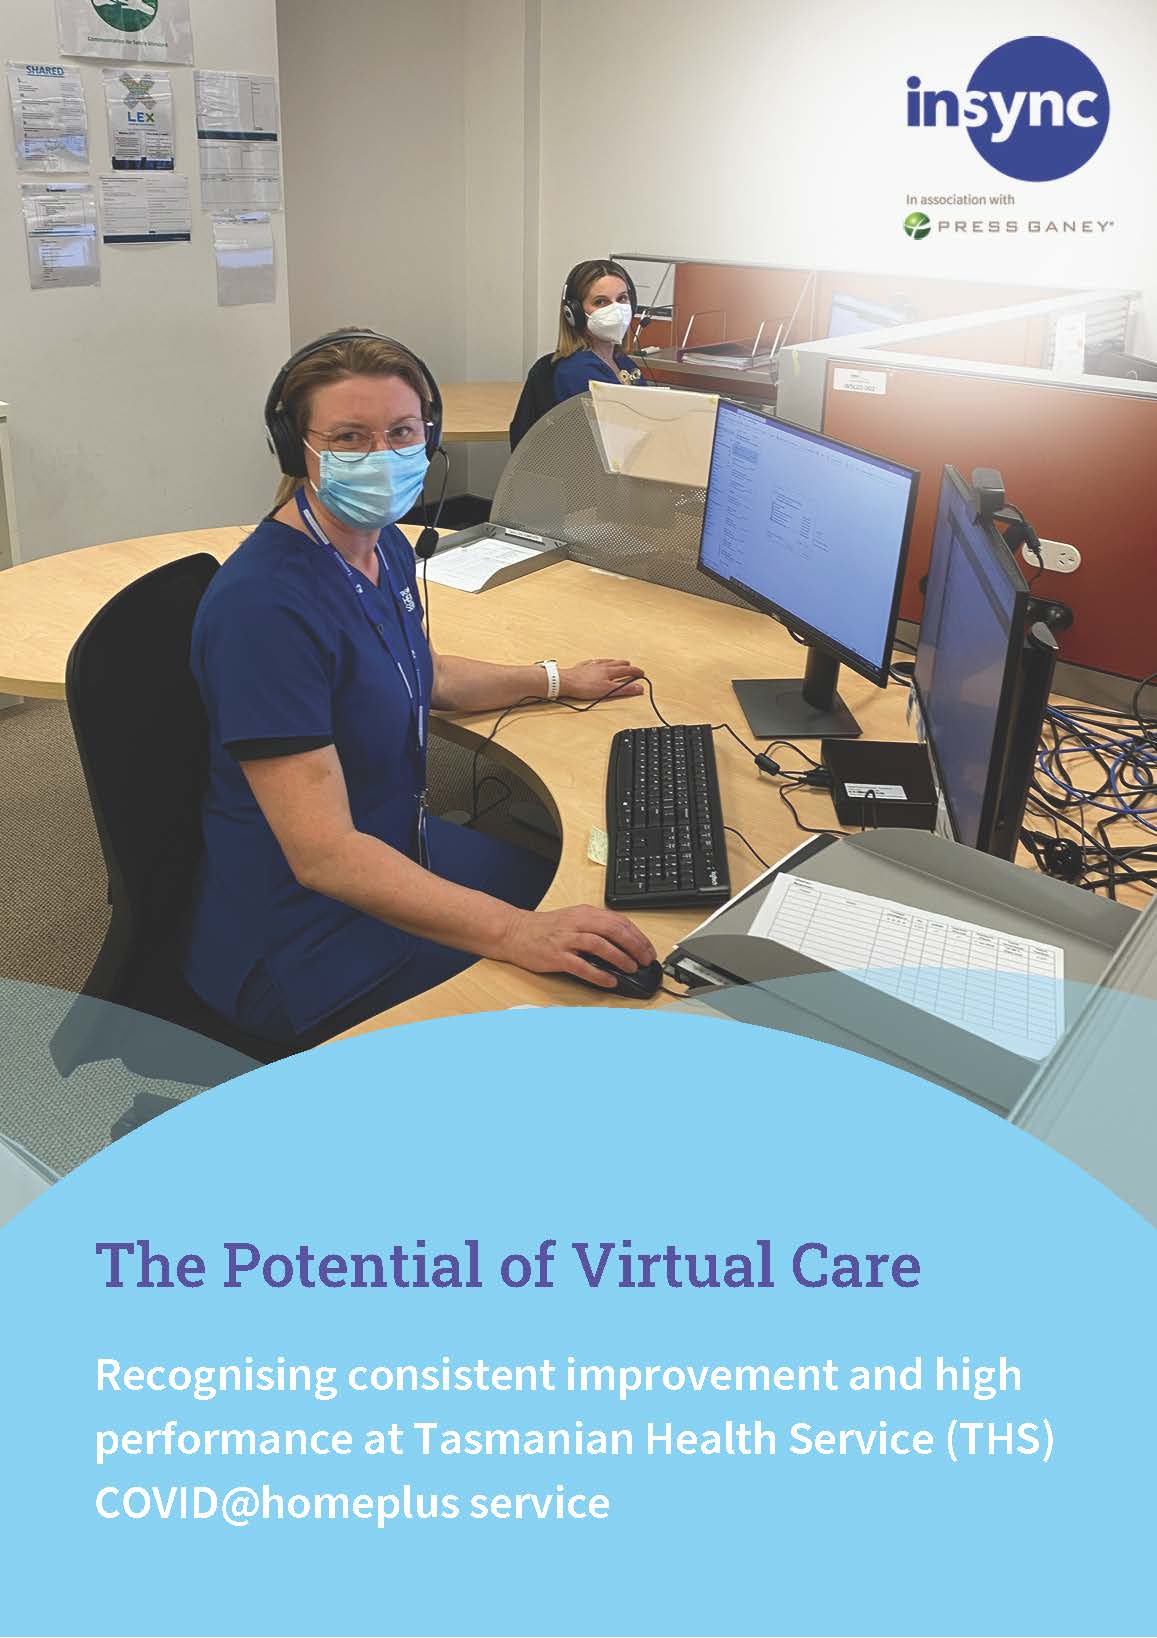 Unlocking the Potential of Virtual Care: The Success Story of Tasmanian Health Service's COVID@homeplus Program